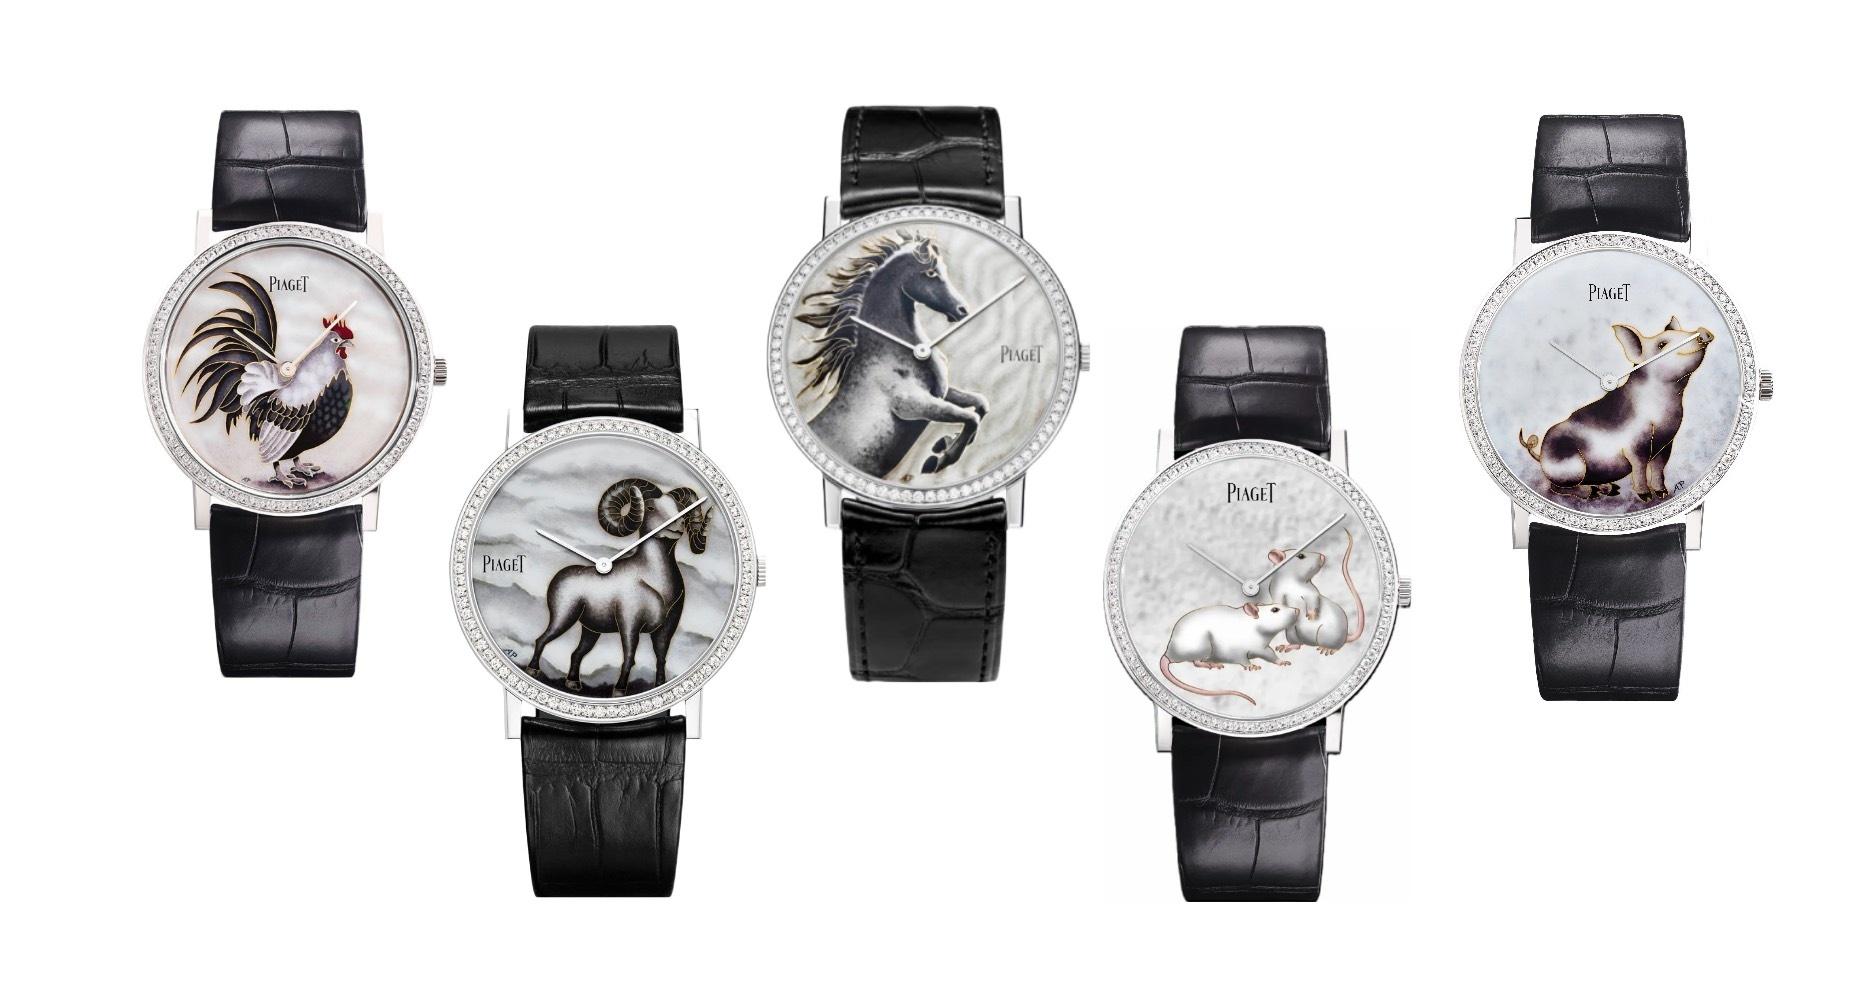 A few of the Altiplano Zodiac watches produced by Piaget over the past cycle, with dials created by Anita Porchet.